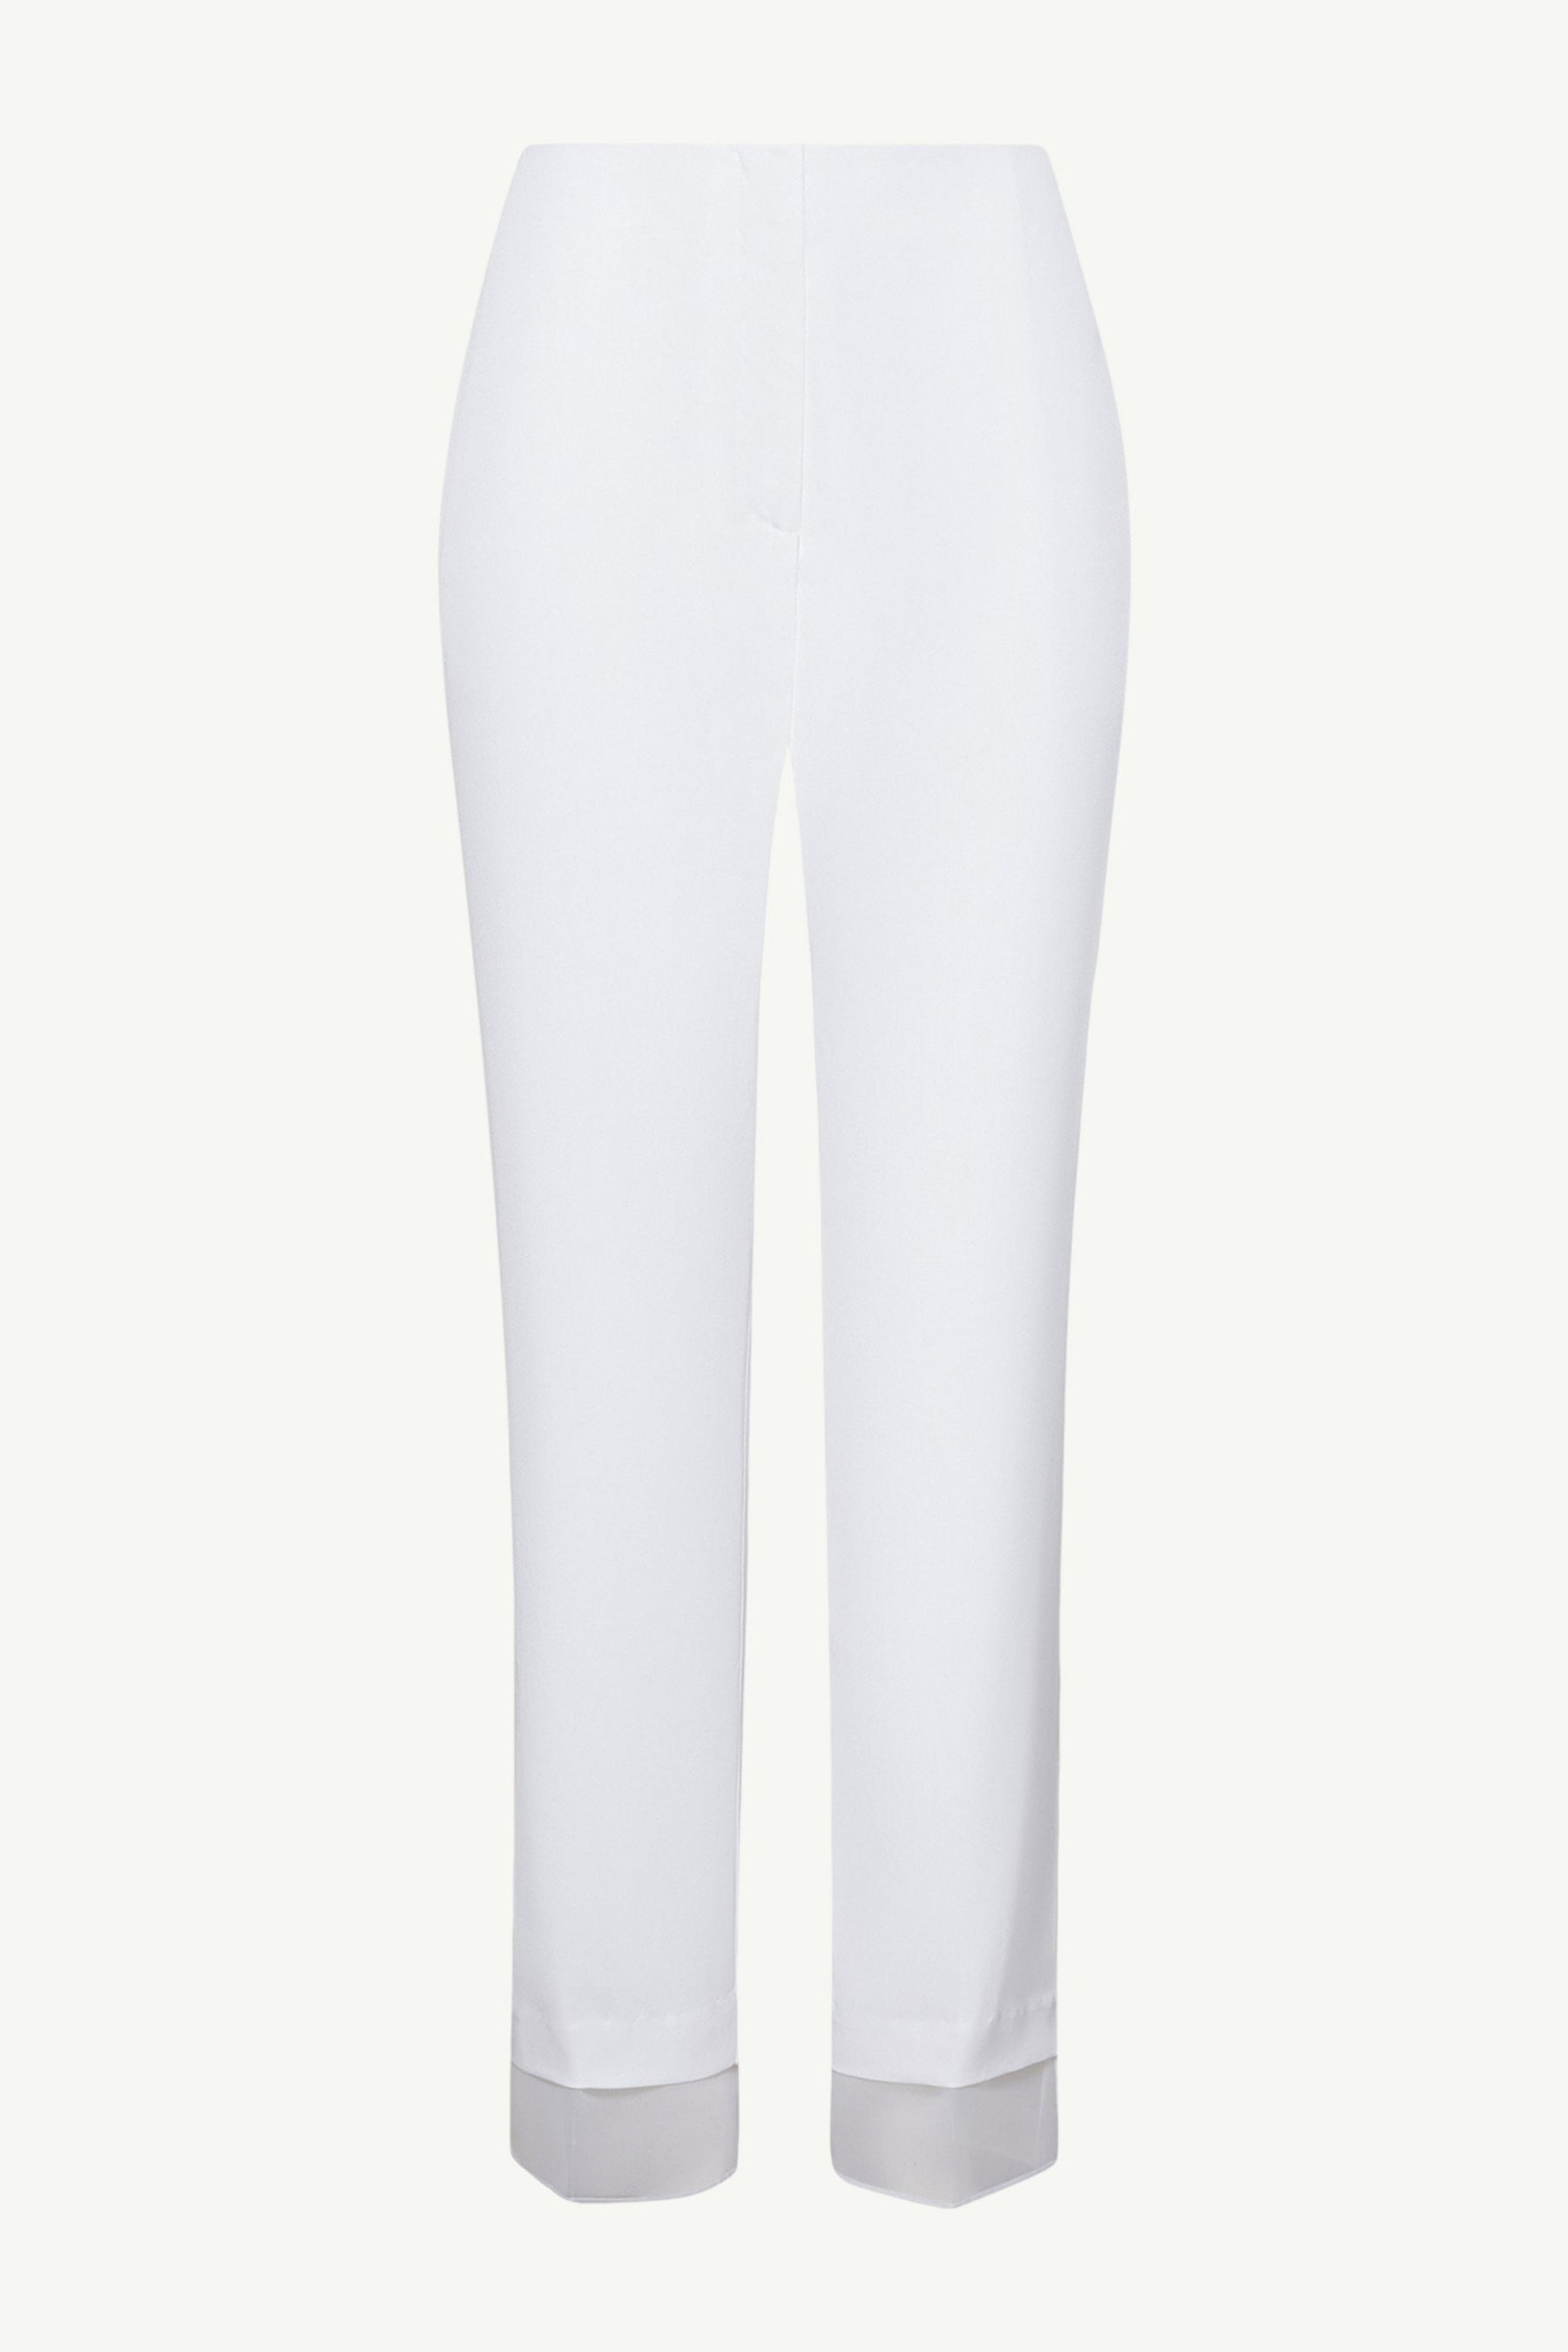 Rayan Organza Trim Trousers - White Clothing Veiled 